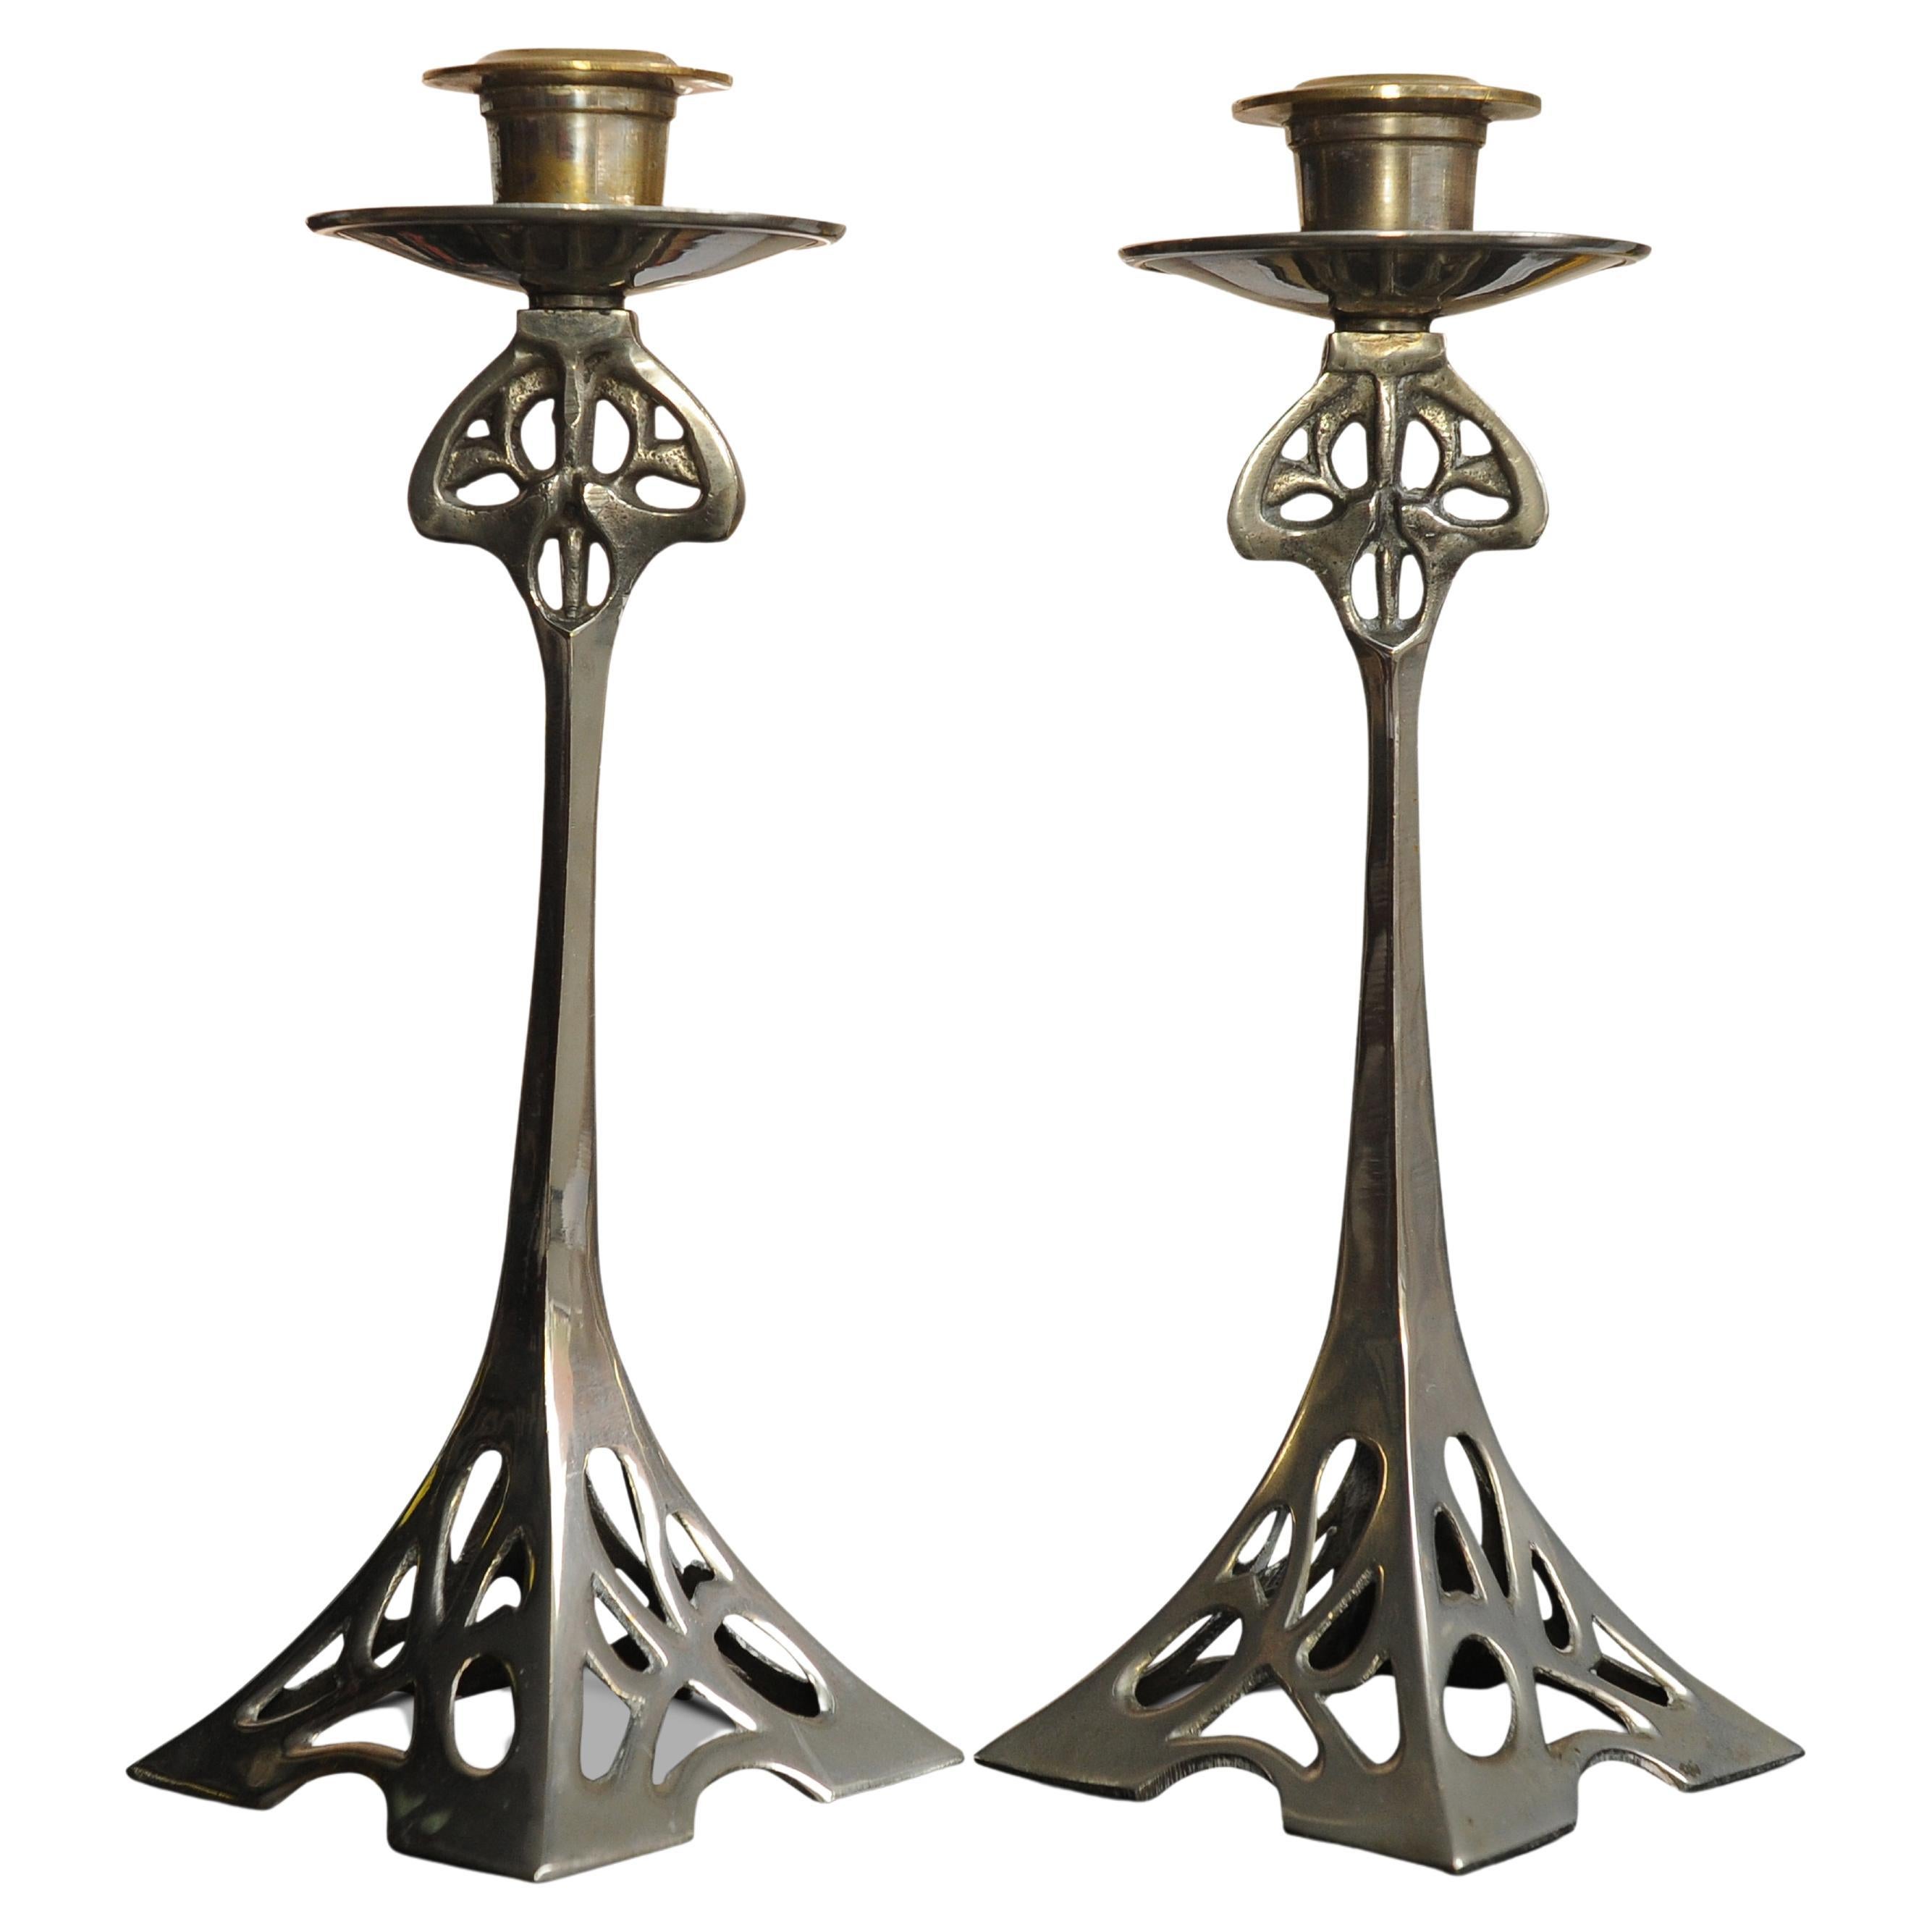 An Elegant Matching Set of Silver Plated Liberty of London Arts & Crafts Candlesticks, 1920's.

These could possibly have been designed by Archibald Knox

The London store Liberty & Co was founded by Arthur Lasenby Liberty (1843-1917) in 1875. The